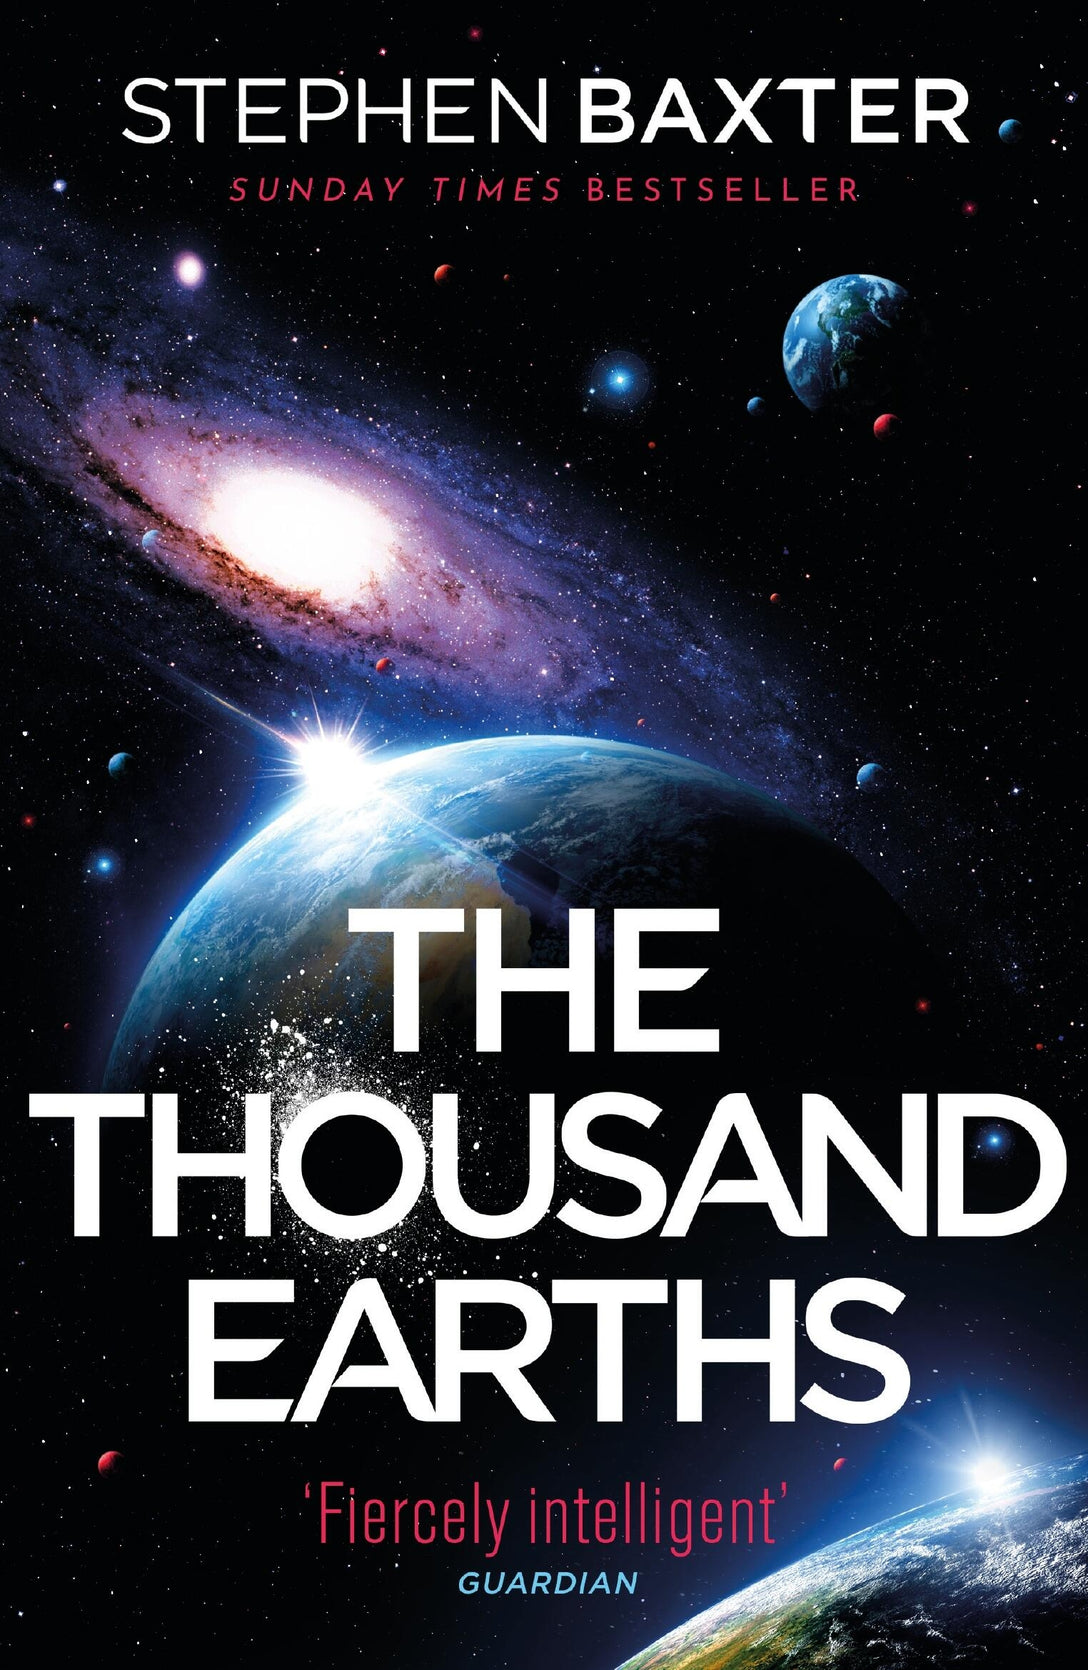 The Thousand Earths by Stephen Baxter